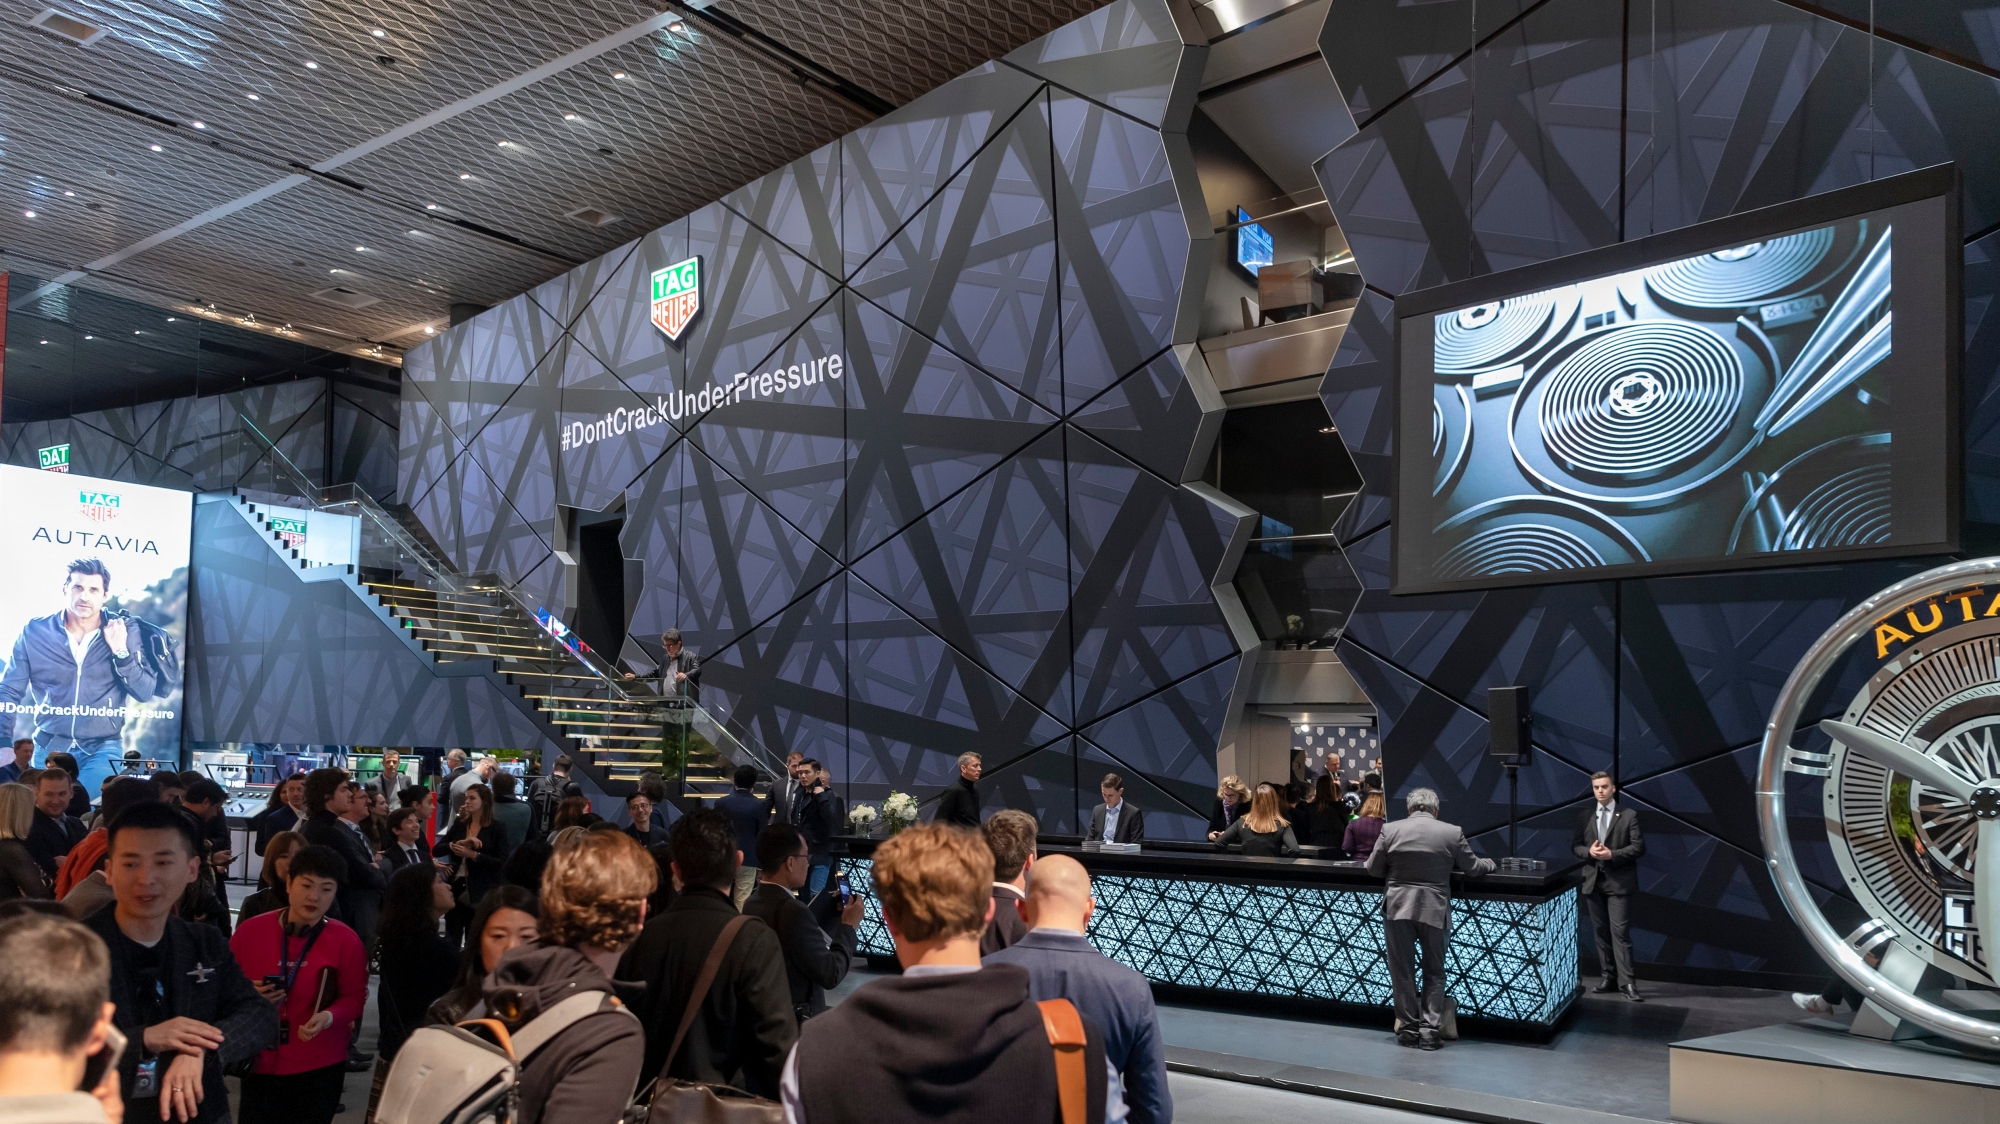 The Tag Heuer booth, pictured at the world watch and jewellery show Baselworld in Basel, Switzerland, on Wednesday, March 20, 2019. (KEYSTONE/Georgios Kefalas) SCHWEIZ MESSE BASELWORLD 2019